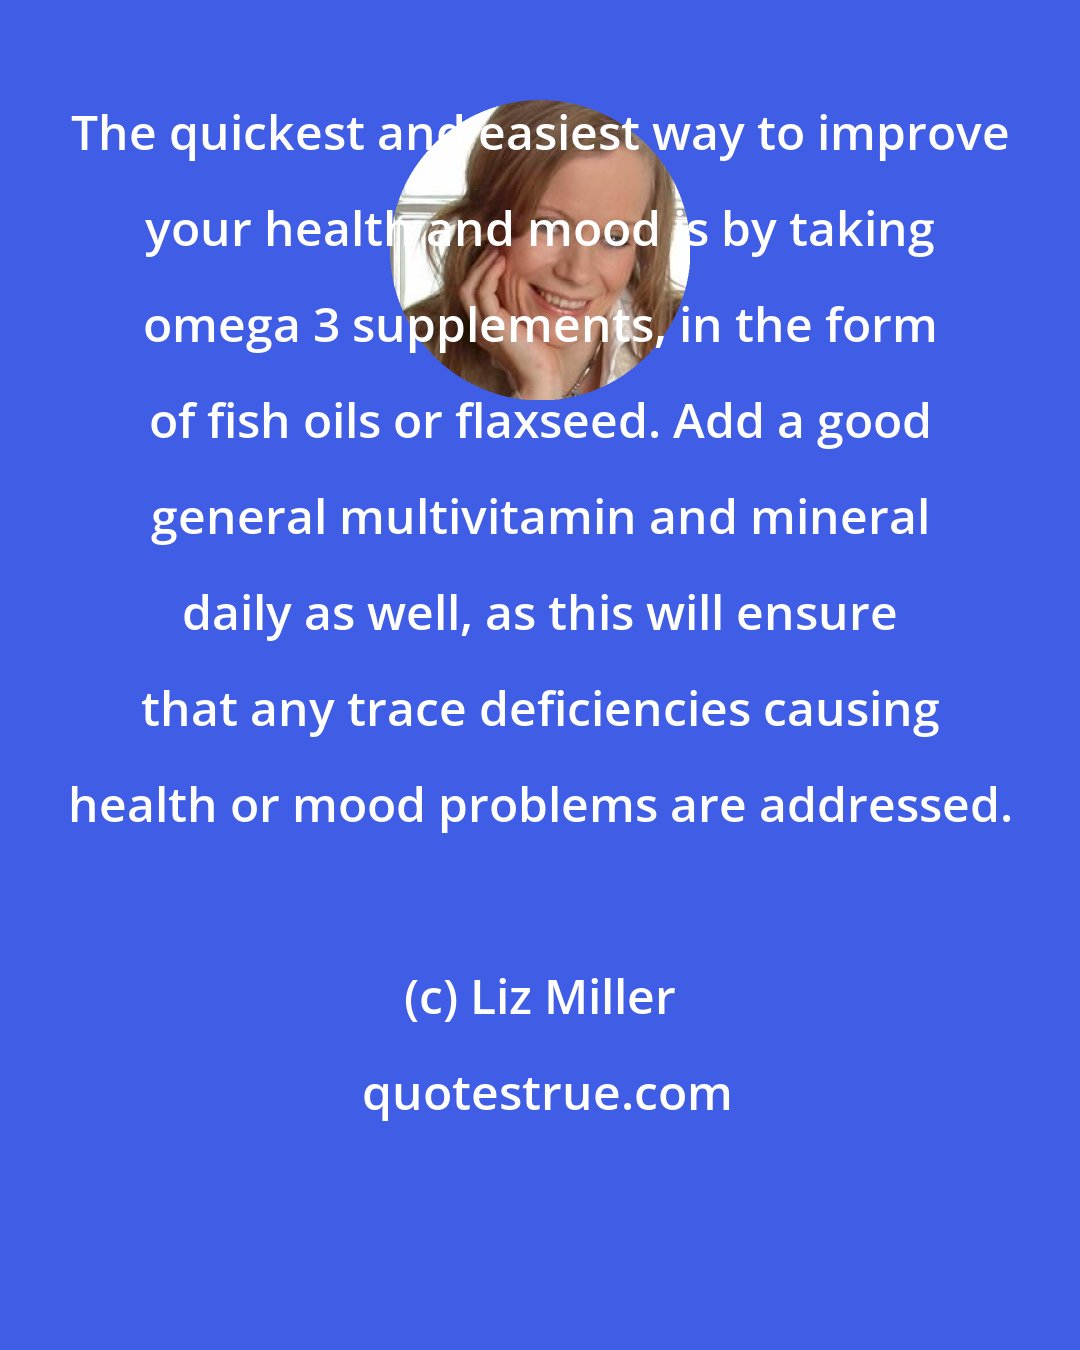 Liz Miller: The quickest and easiest way to improve your health and mood is by taking omega 3 supplements, in the form of fish oils or flaxseed. Add a good general multivitamin and mineral daily as well, as this will ensure that any trace deficiencies causing health or mood problems are addressed.